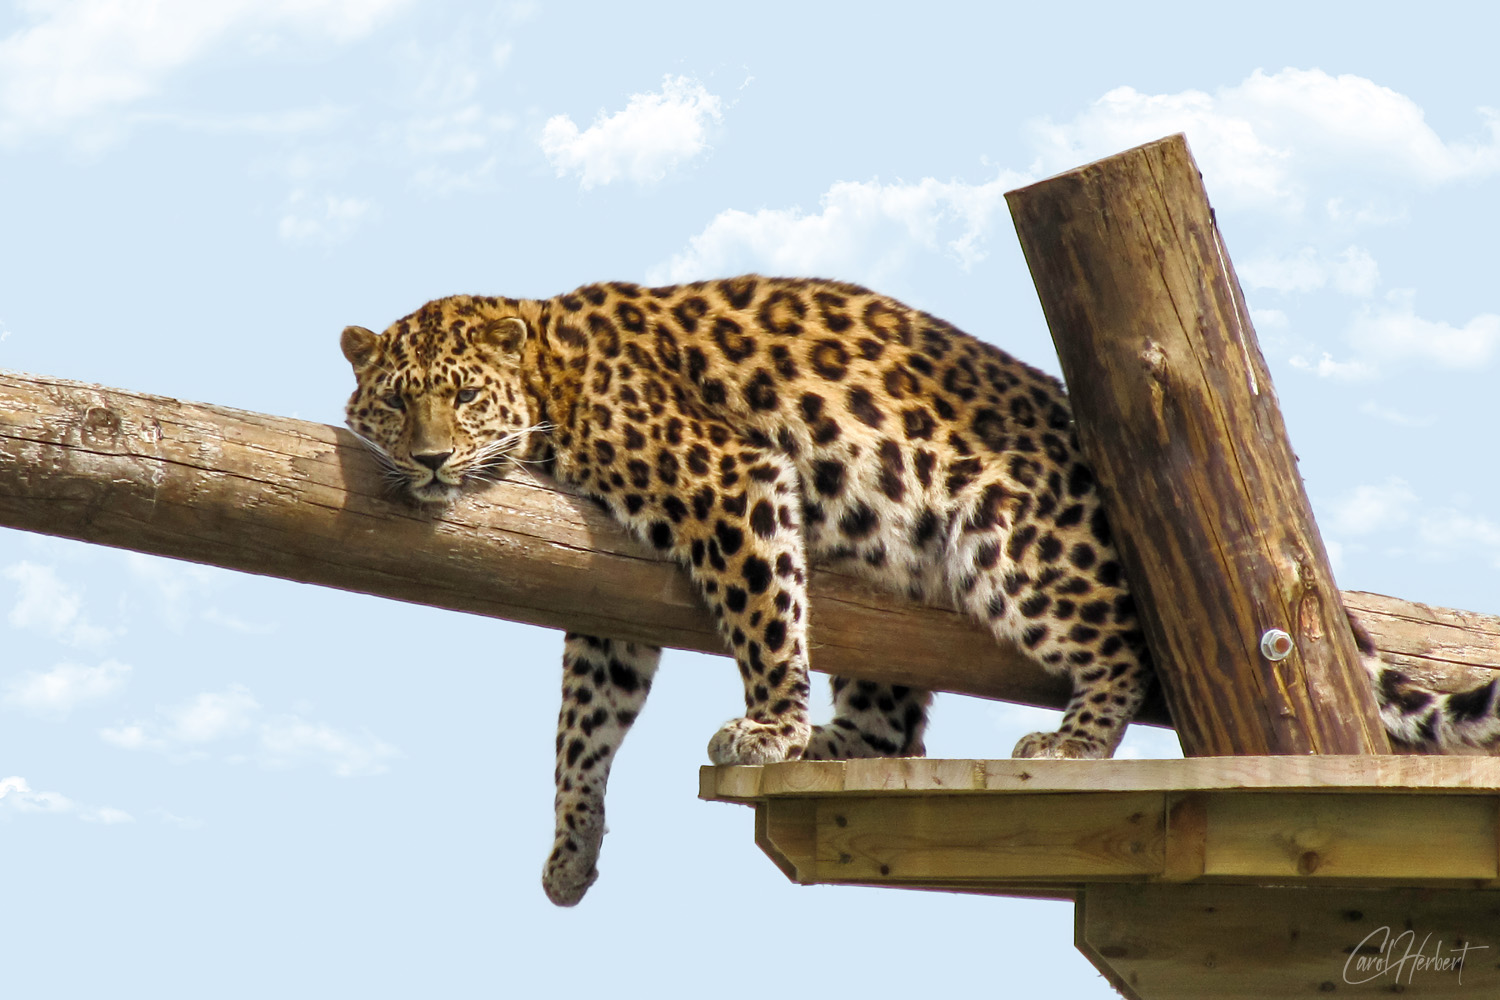 Photograph of a relaxing leopard